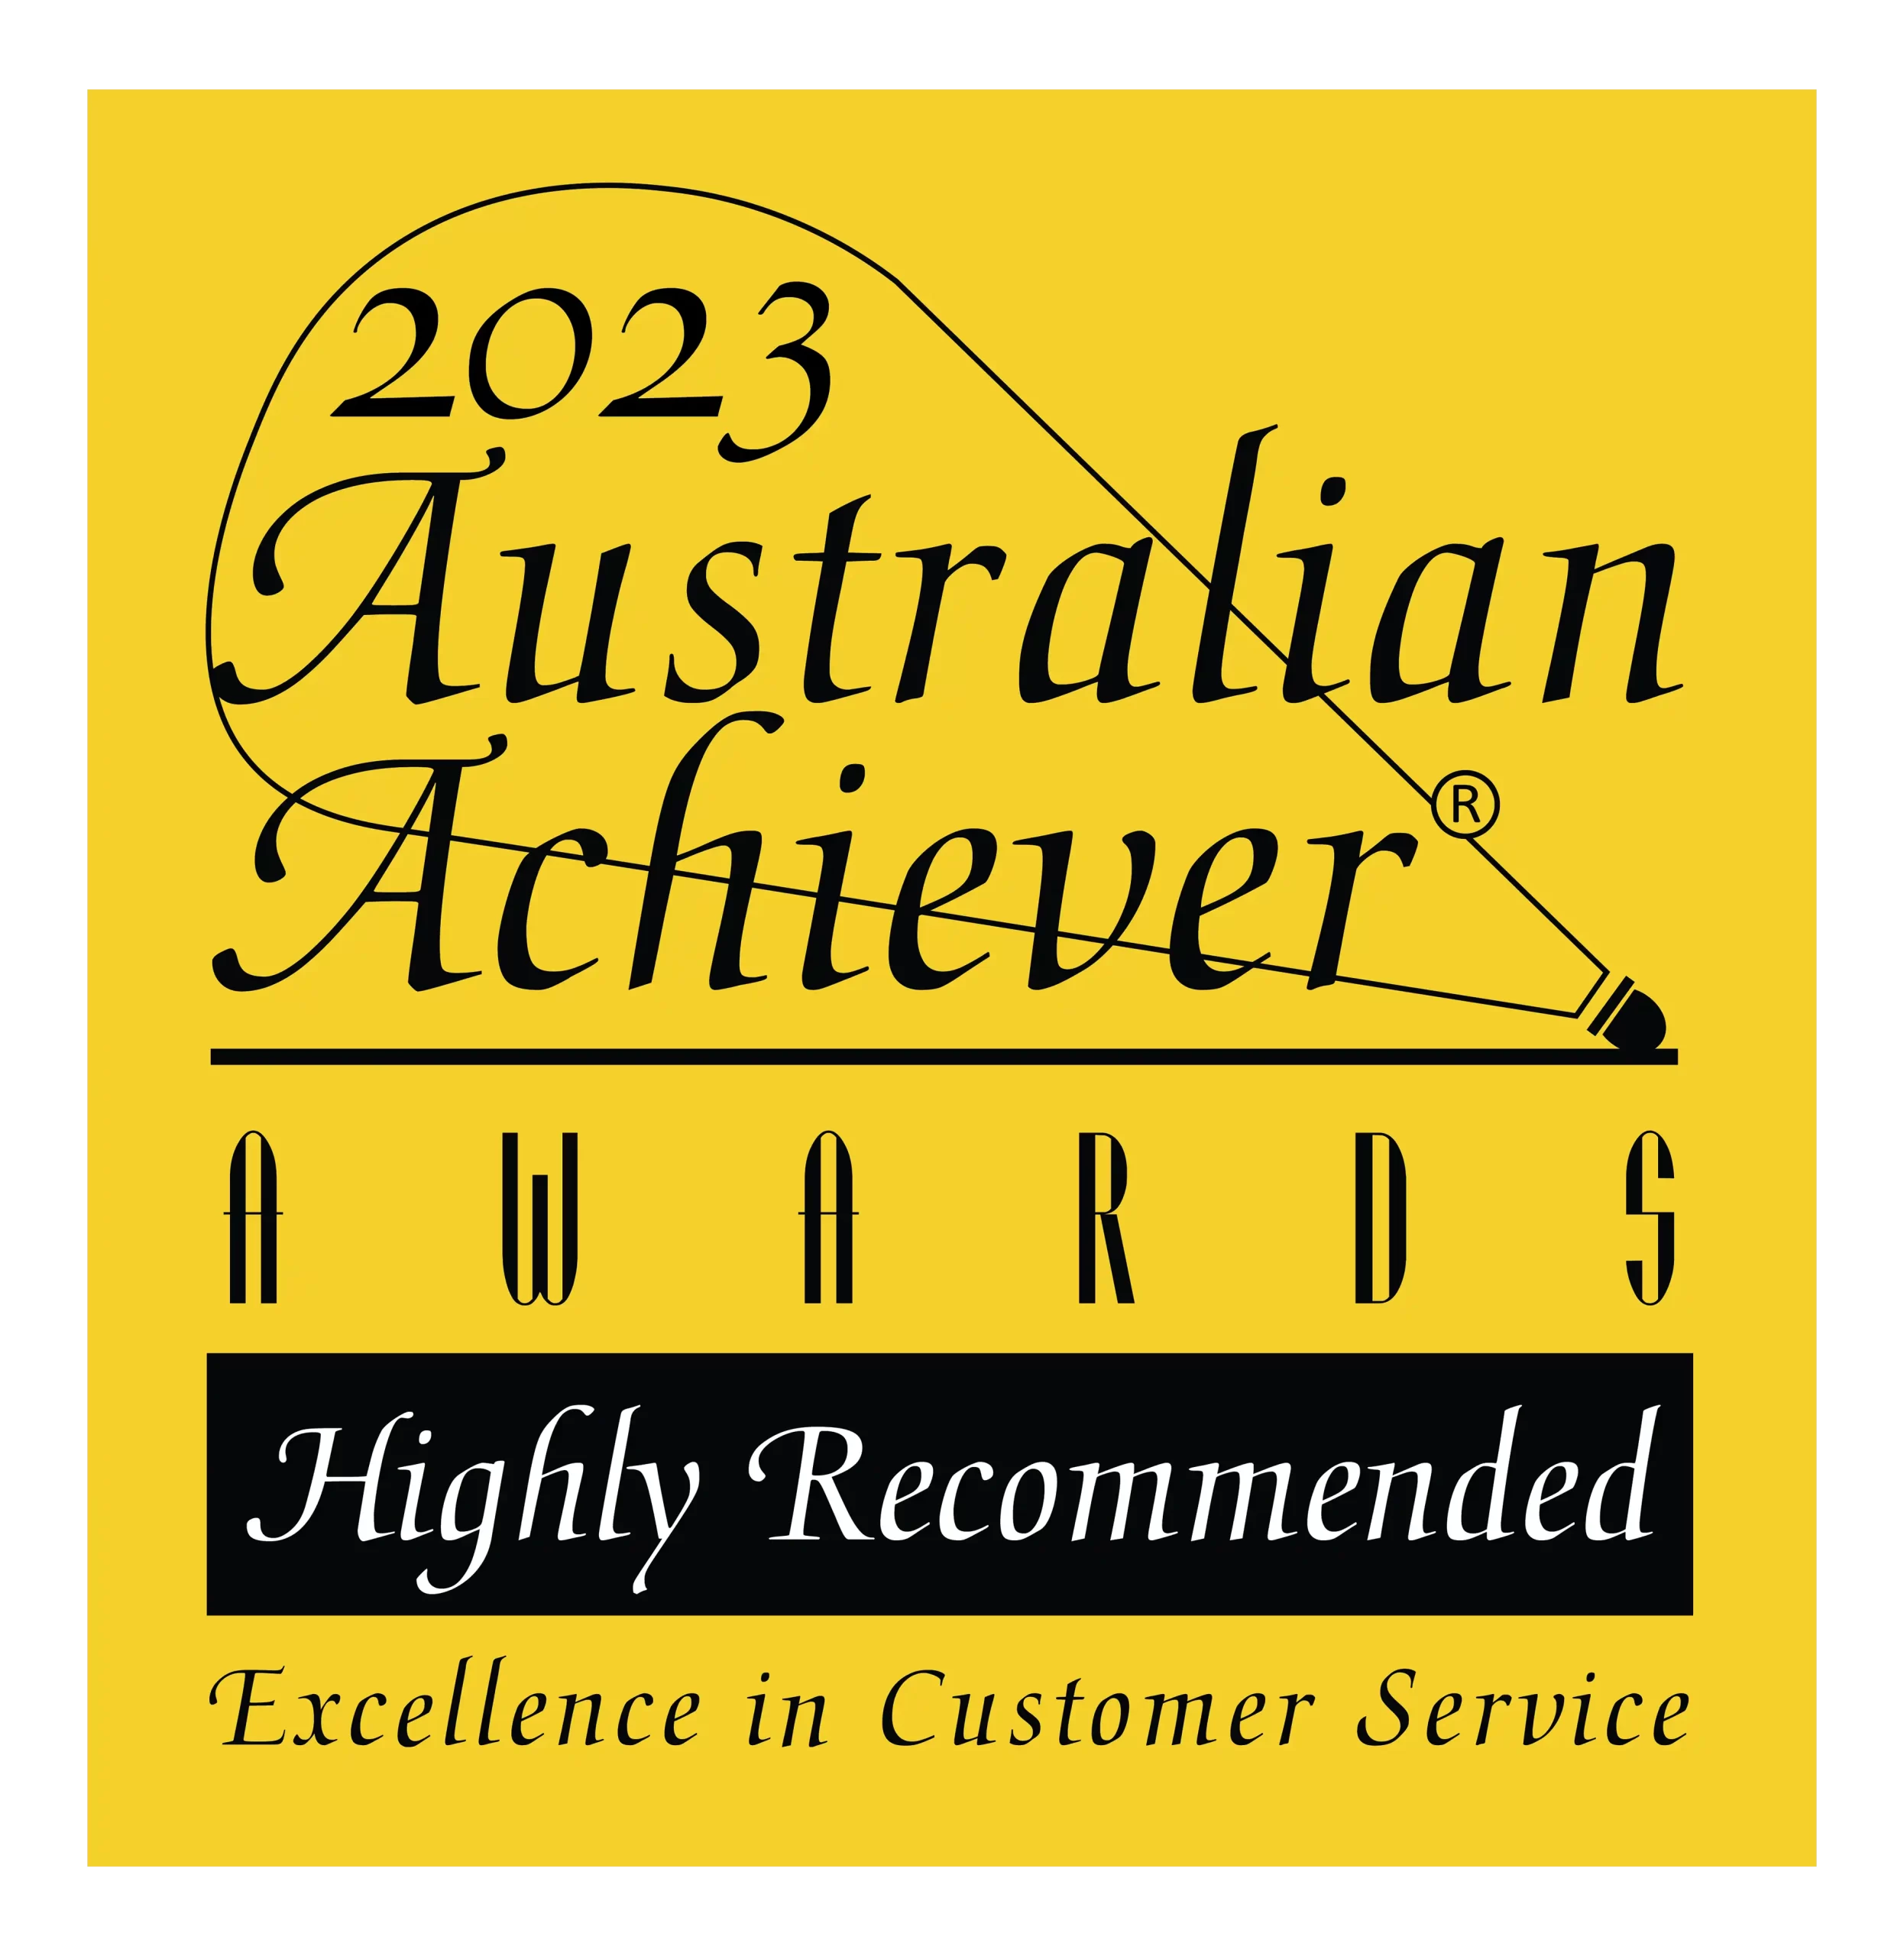 australian achiever award highly recommended 2023